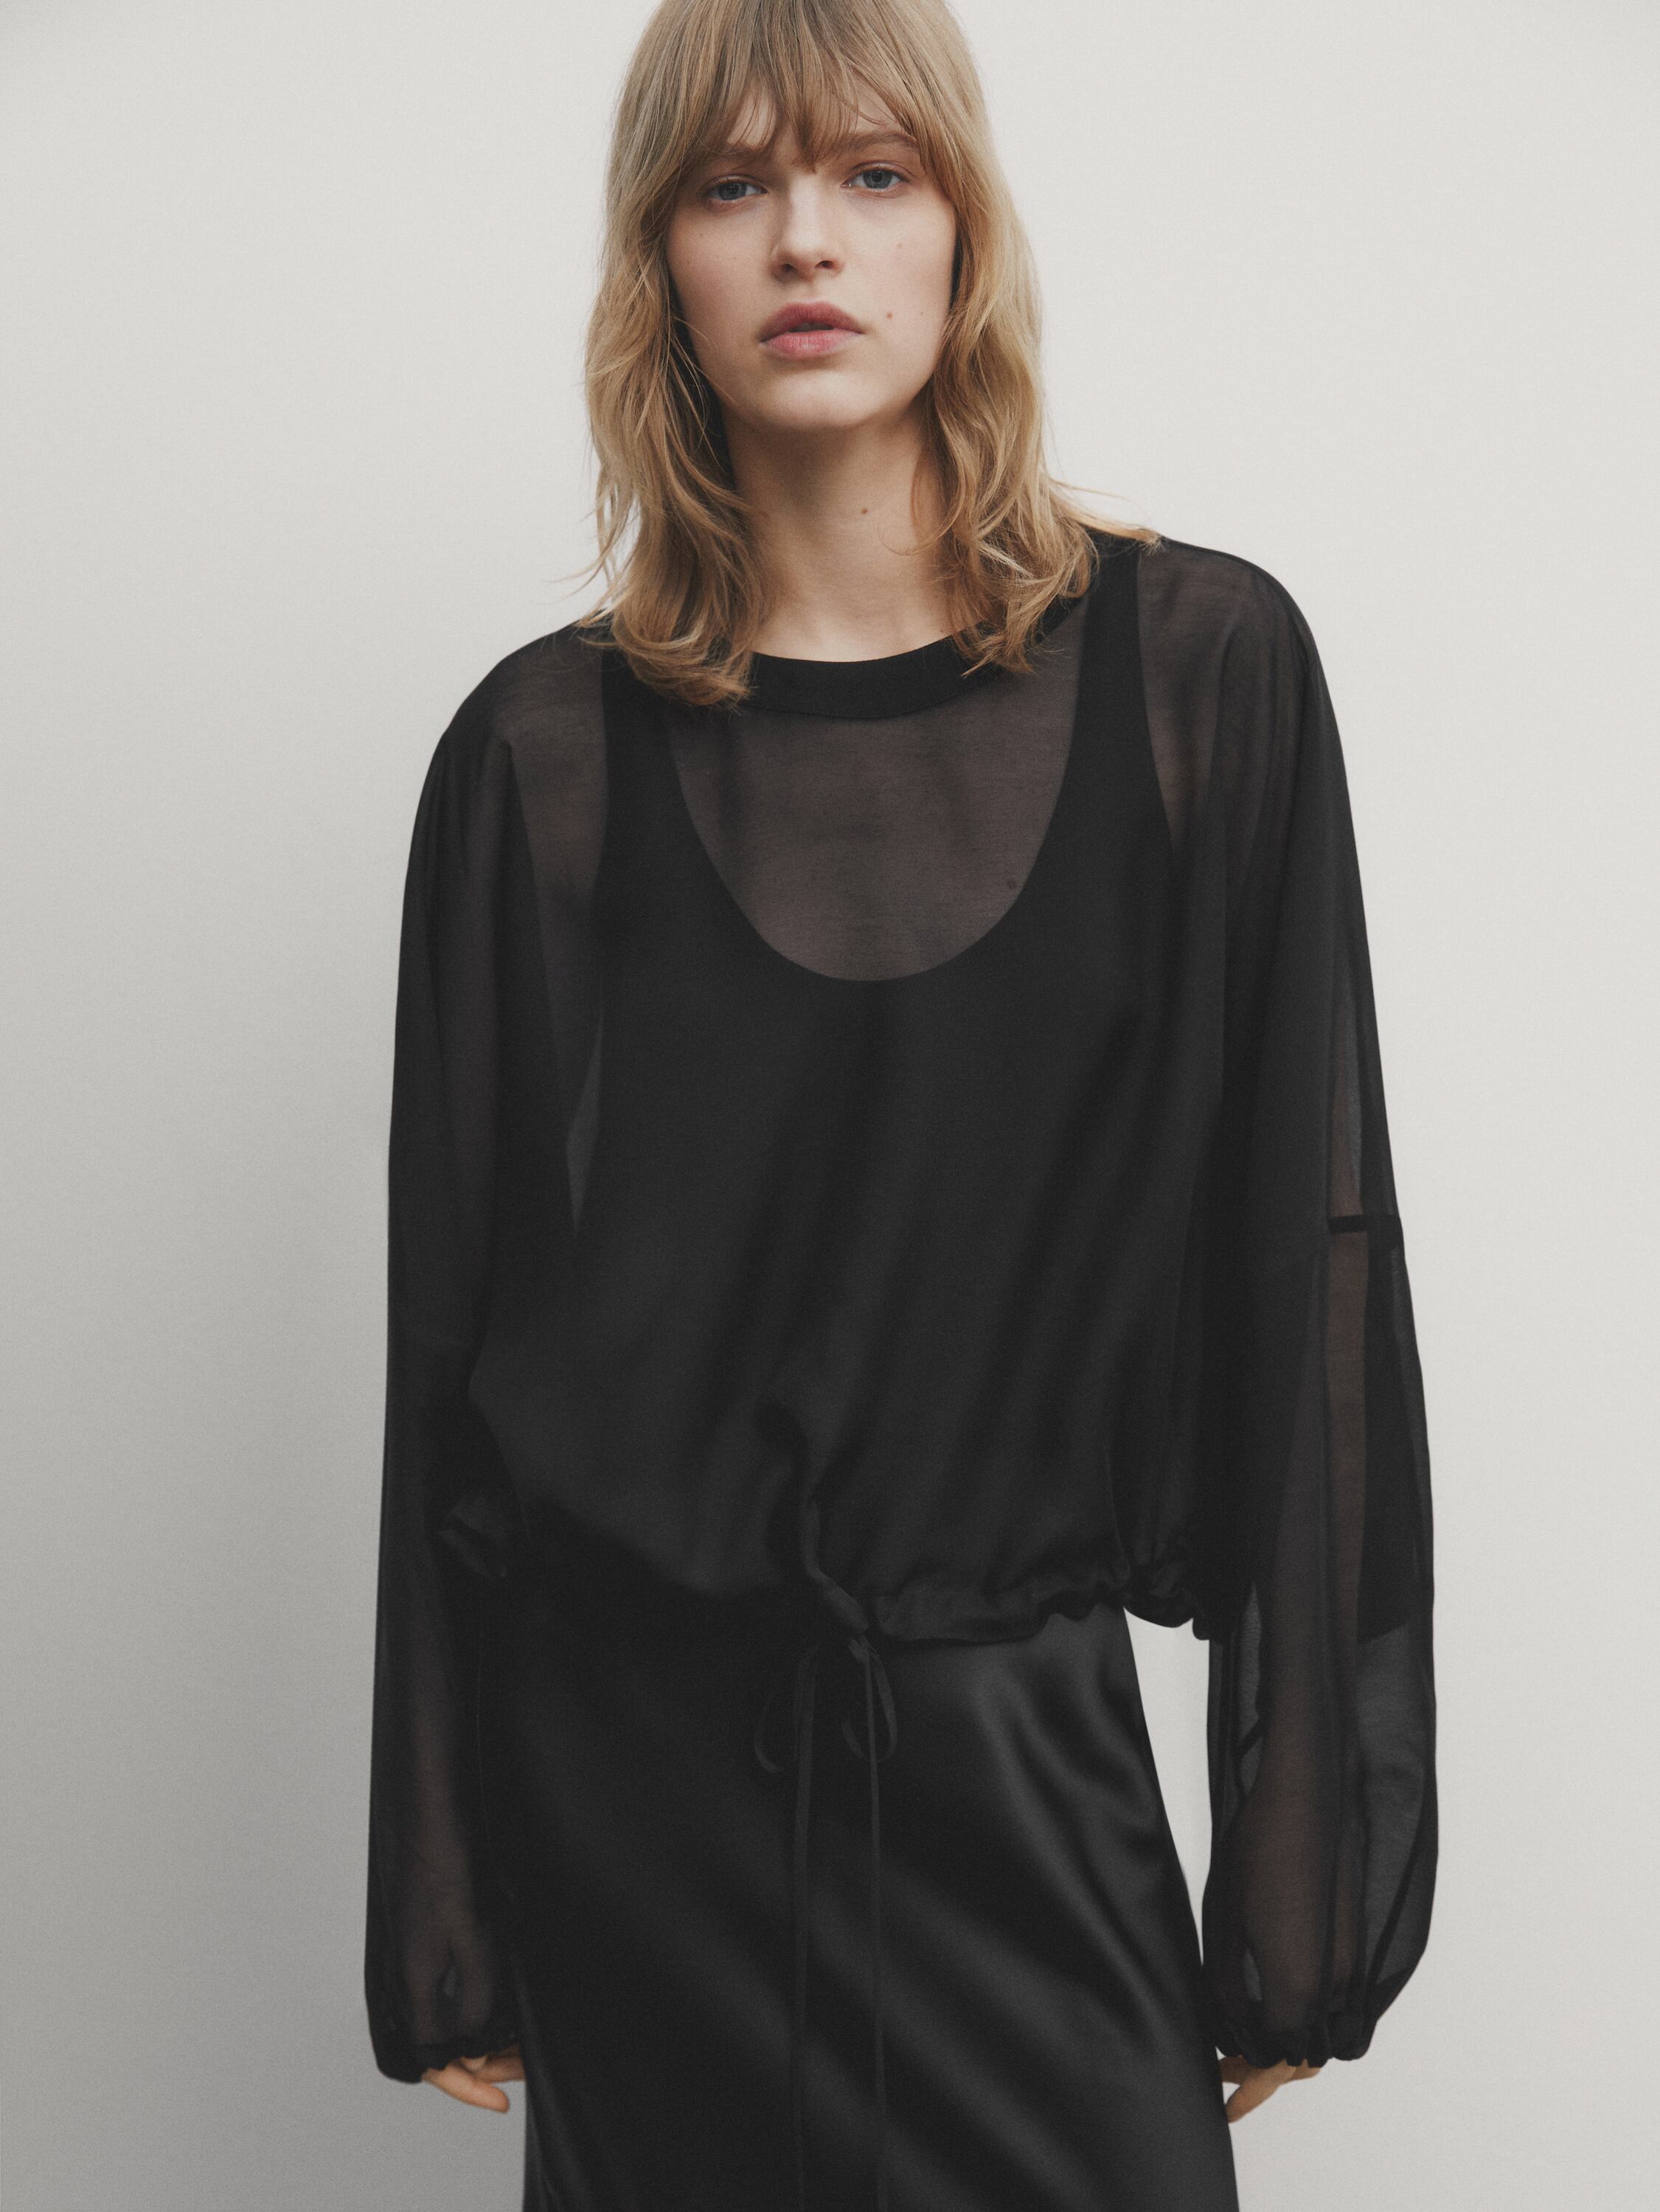 Semi-sheer blouse with tie detail